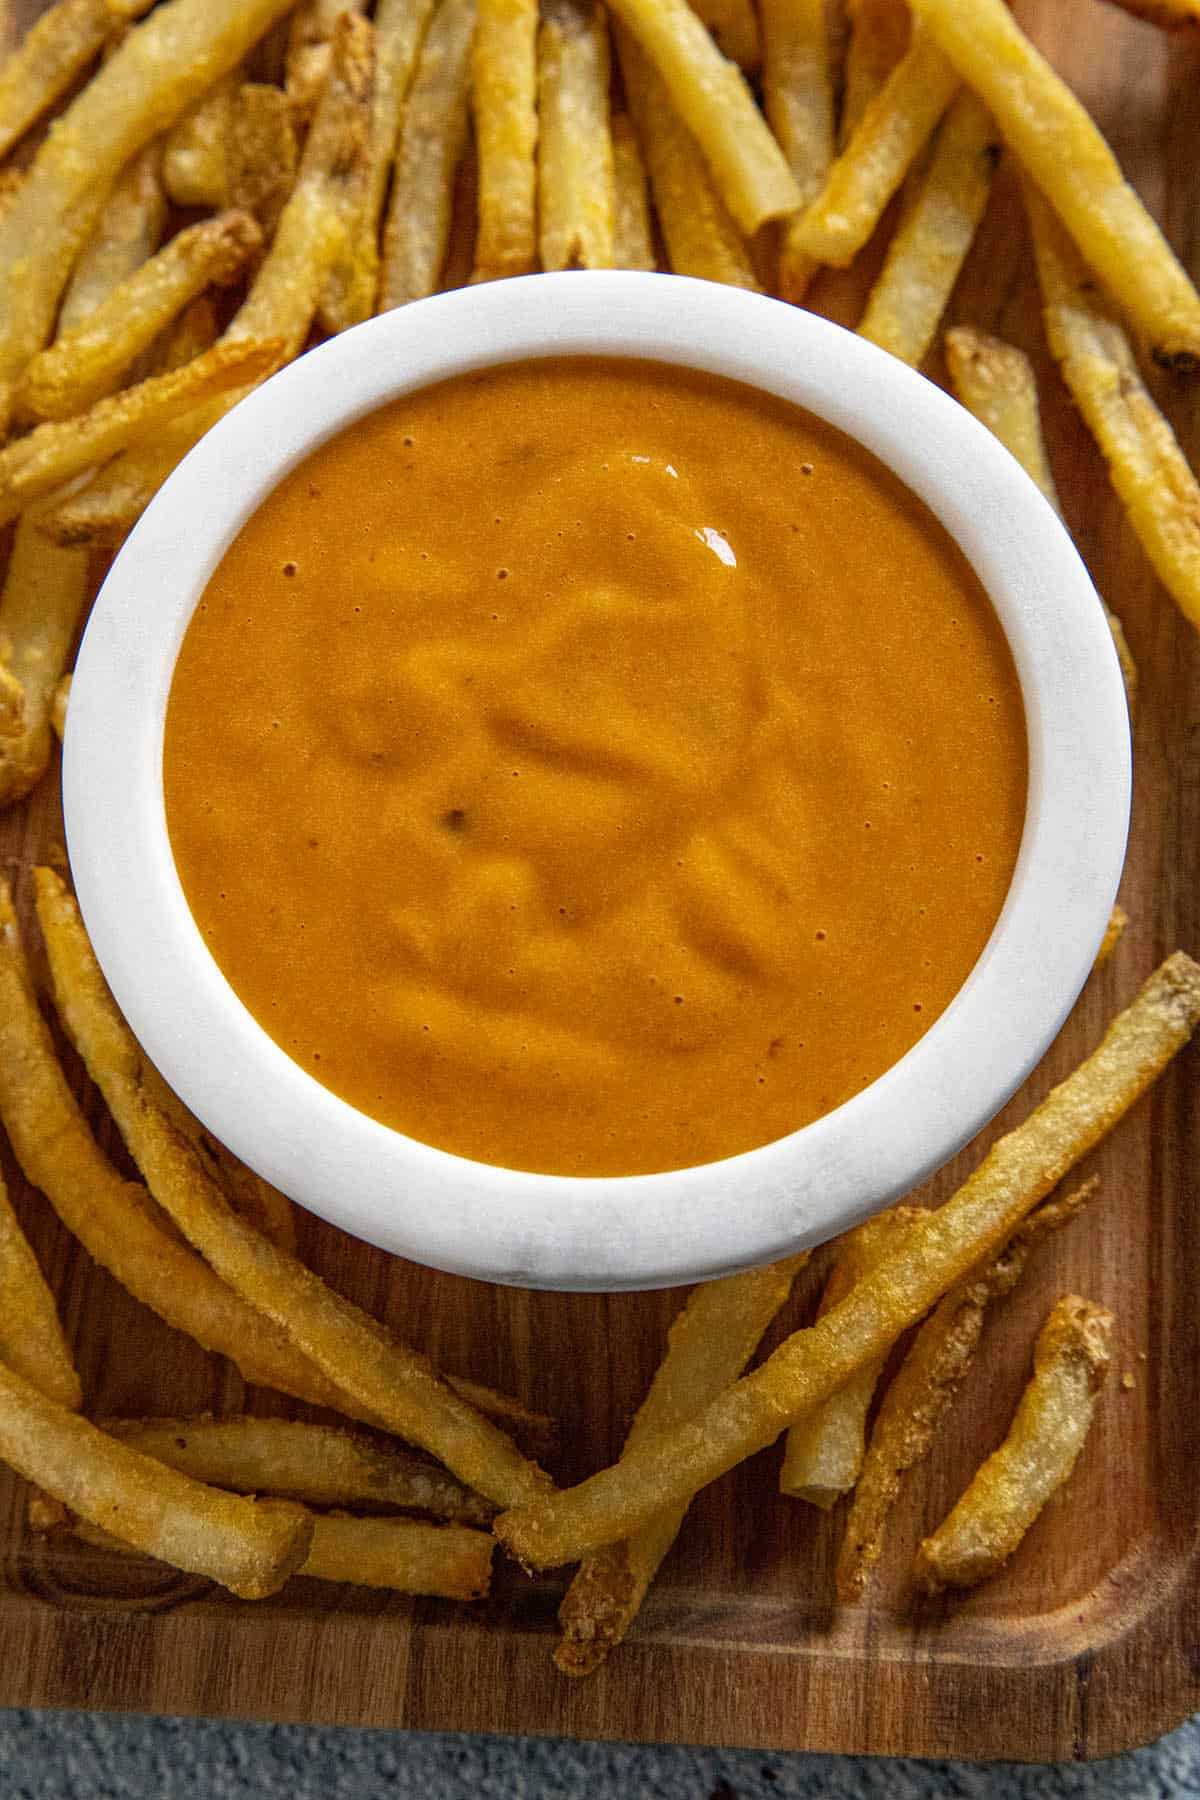 Chipotle Aioli in a bowl with french fries